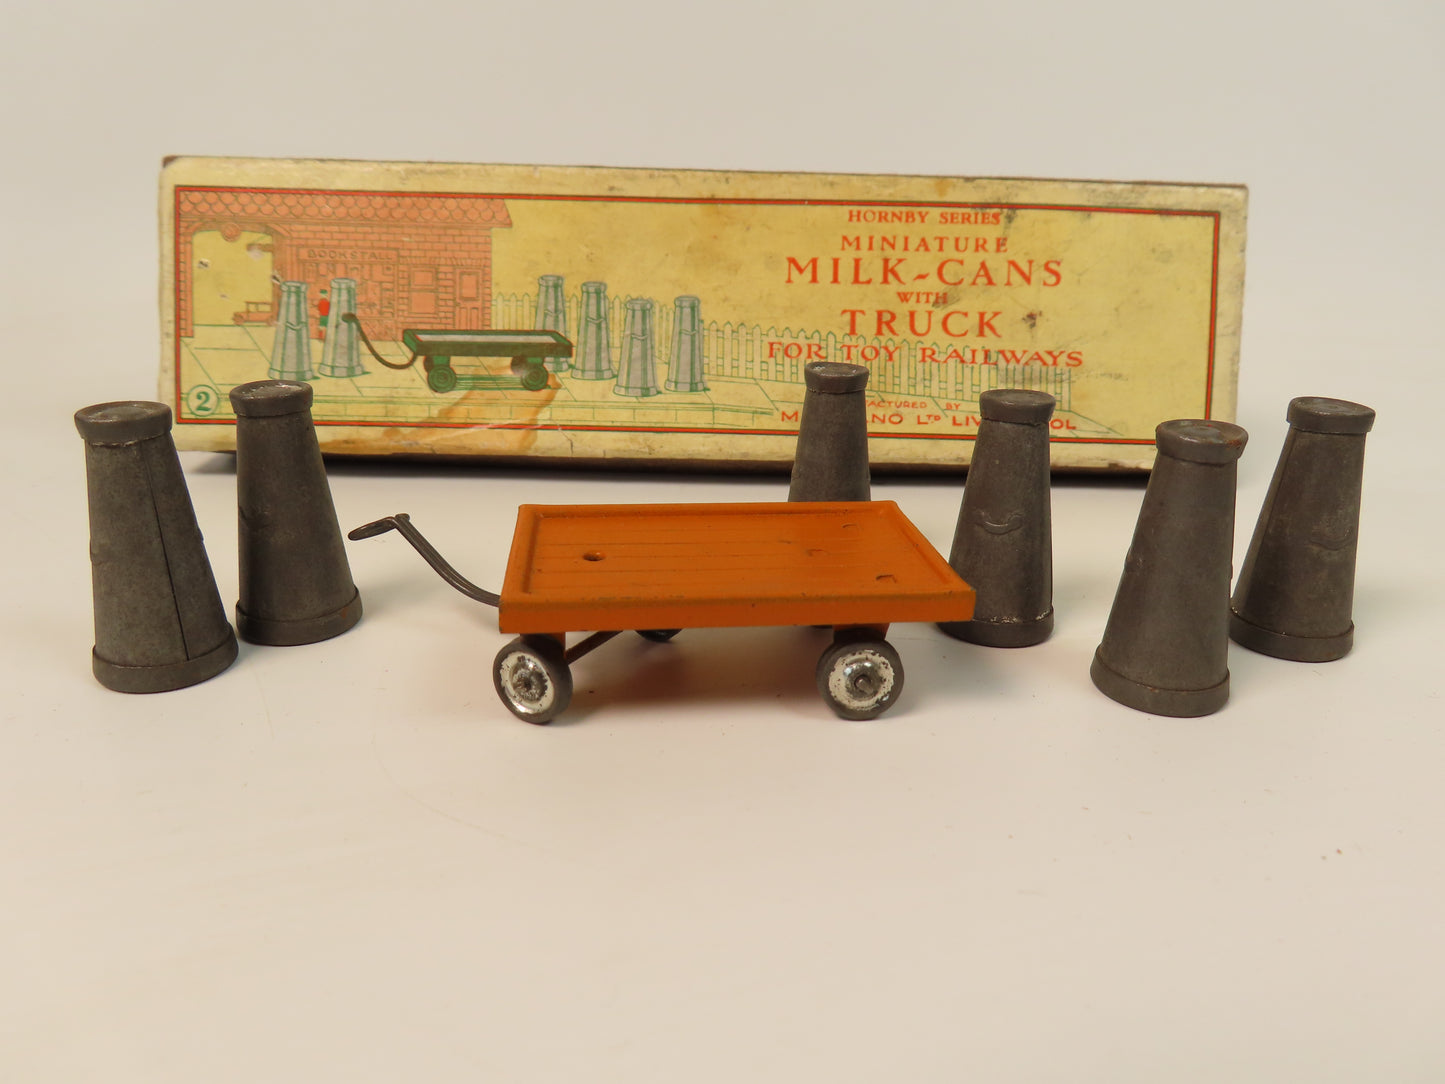 Hornby Series Miniature Milk Cans with Truck - Pre-war.